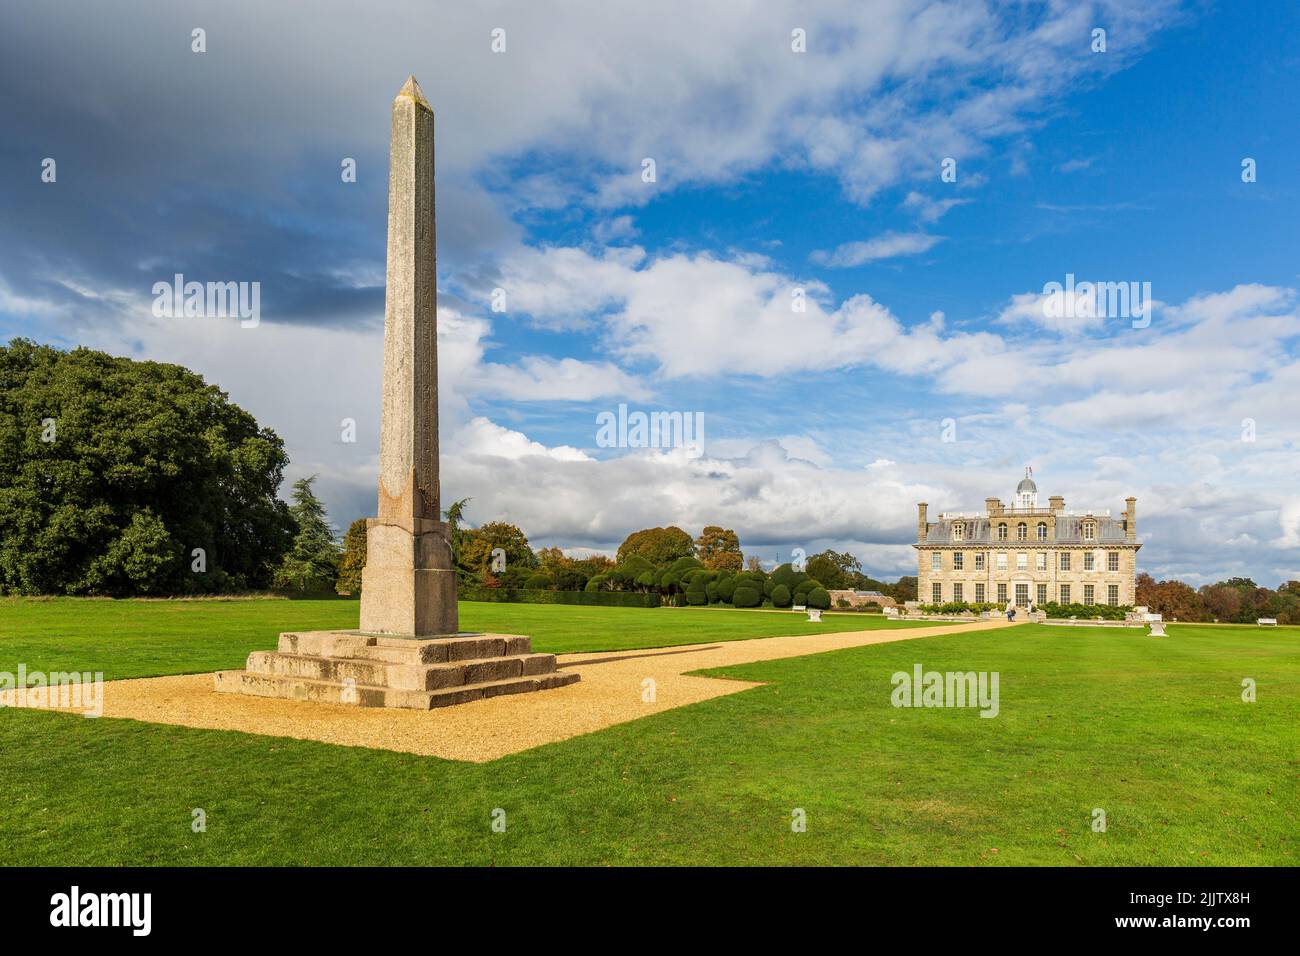 The Egyptian Oberlisk and Kingston Lacy House, Dorset, England Stock Photo